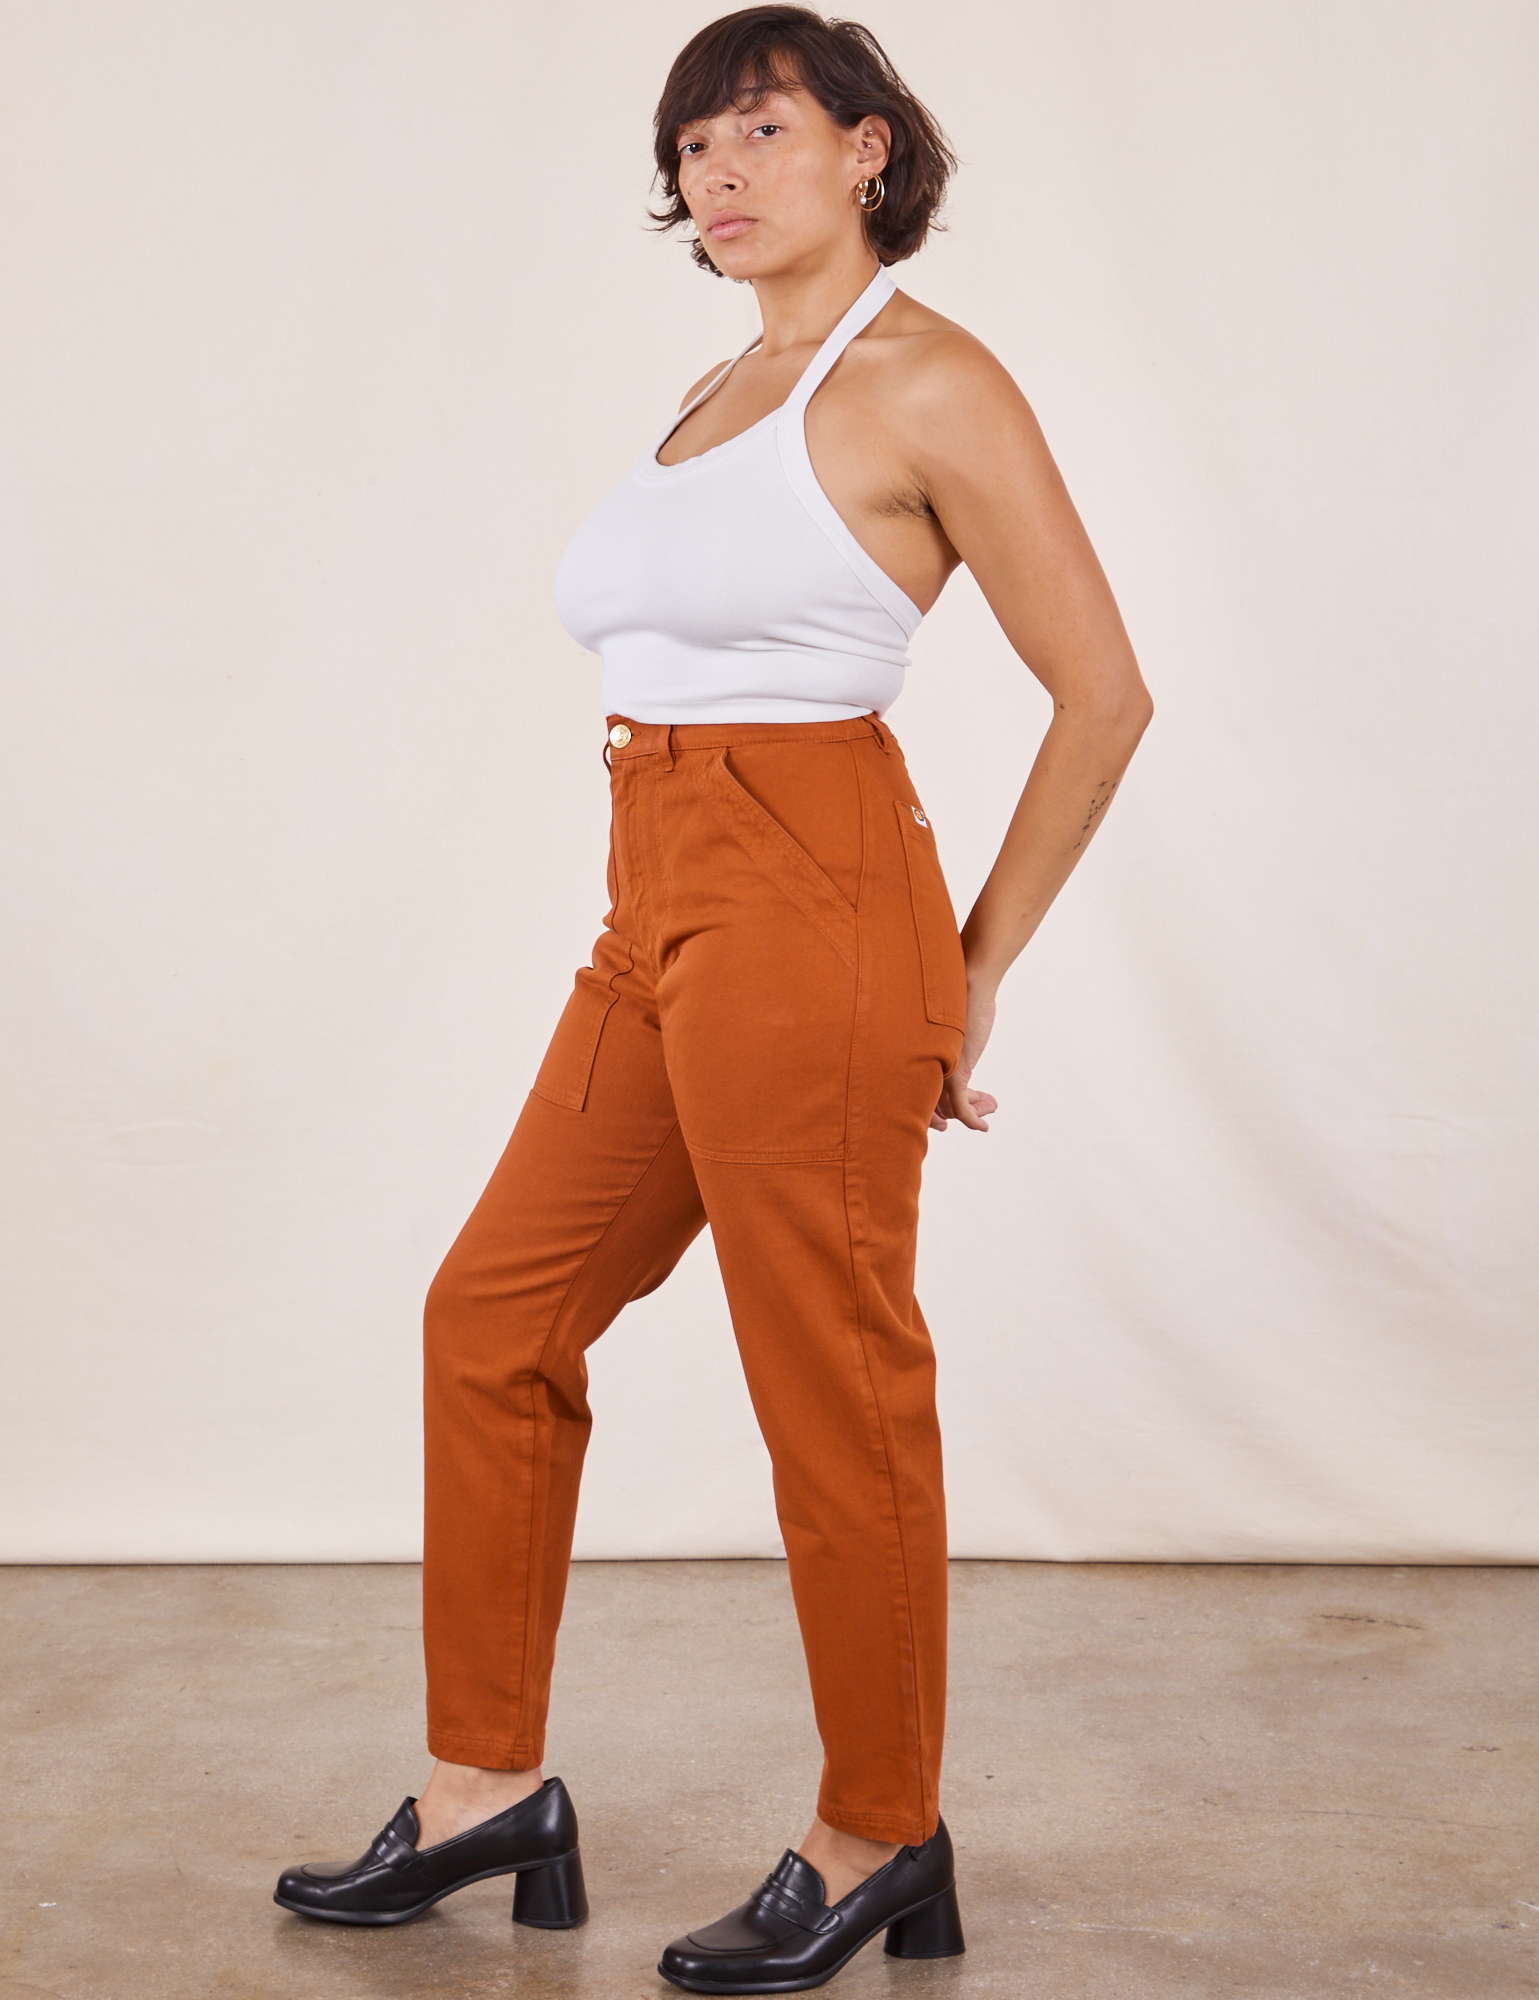 Side view of Pencil Pants in Burnt Terracotta and Halter Top in vintage tee off-white  on Tiara